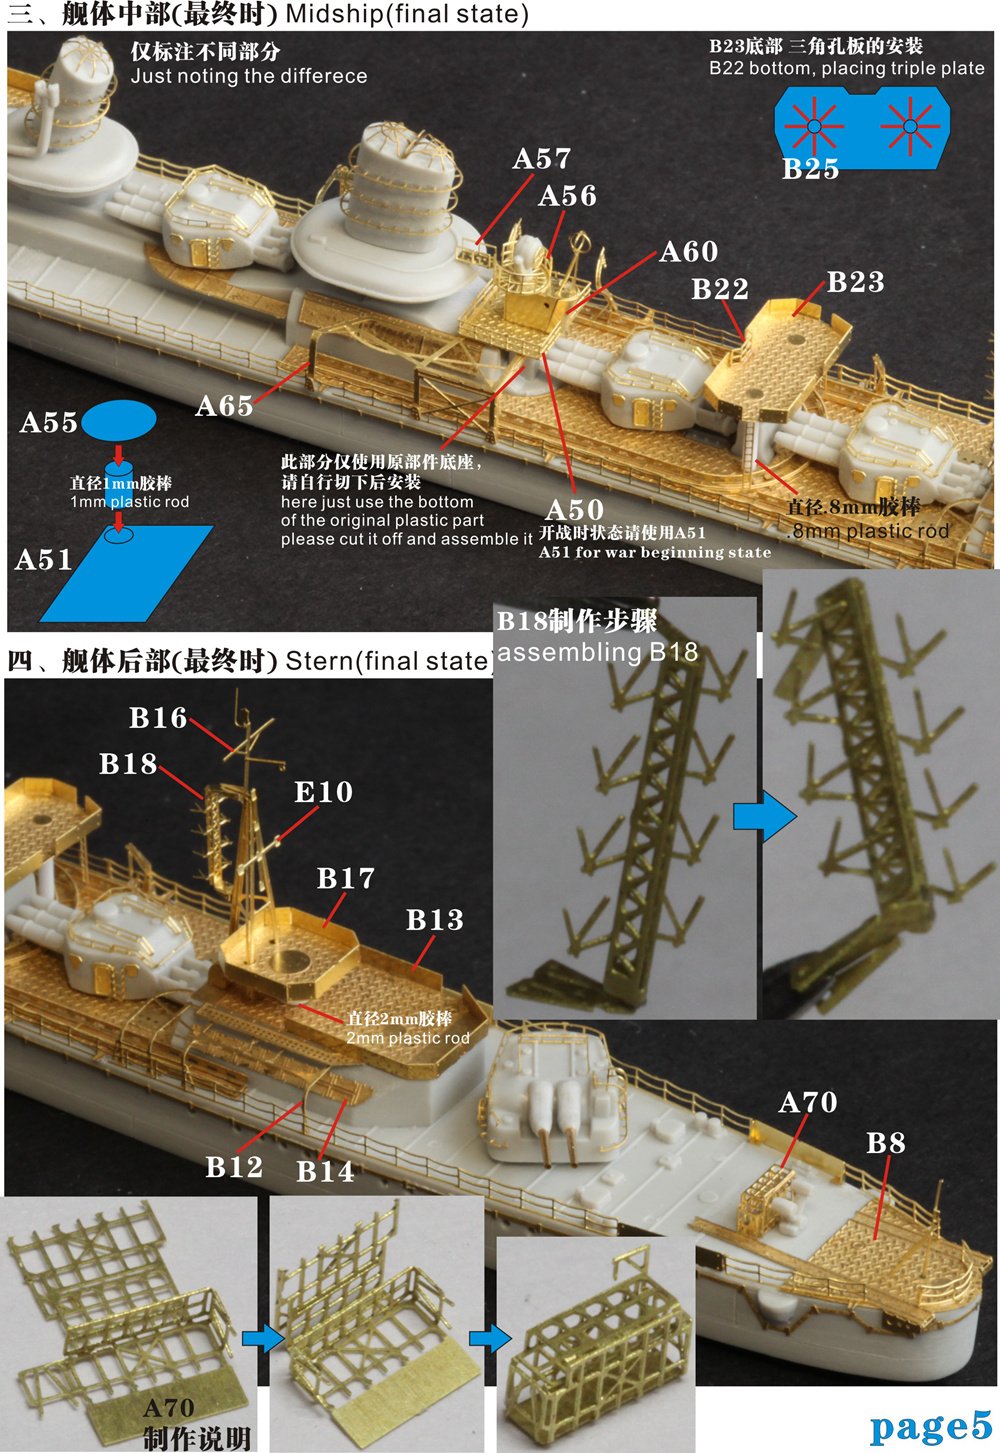 1/700 IJN Fubuki Class (Special Type III) Destroyer Upgrade Set - Click Image to Close